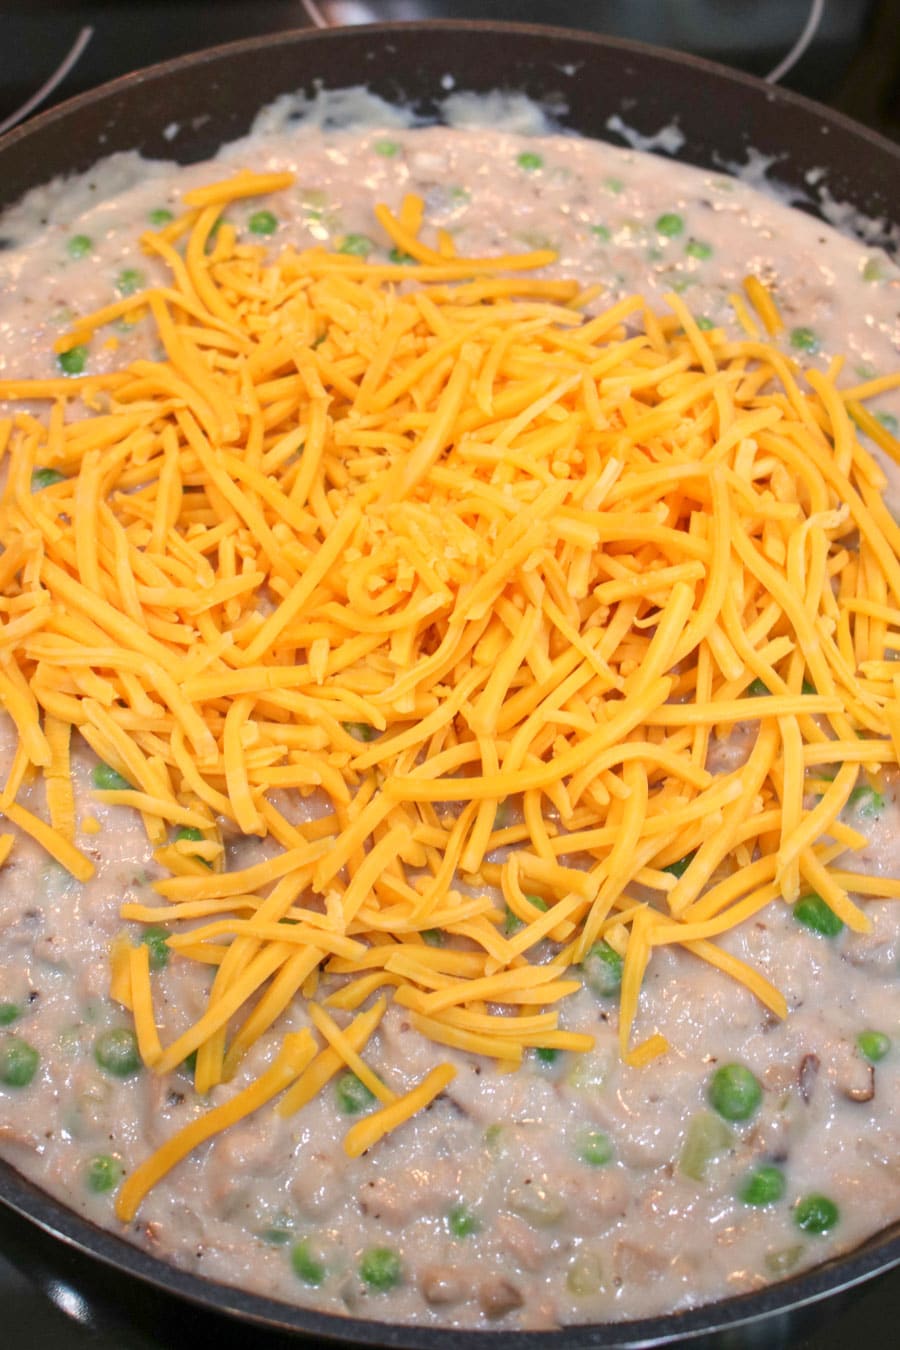 Tuna noodle sauce with peas and cheese added